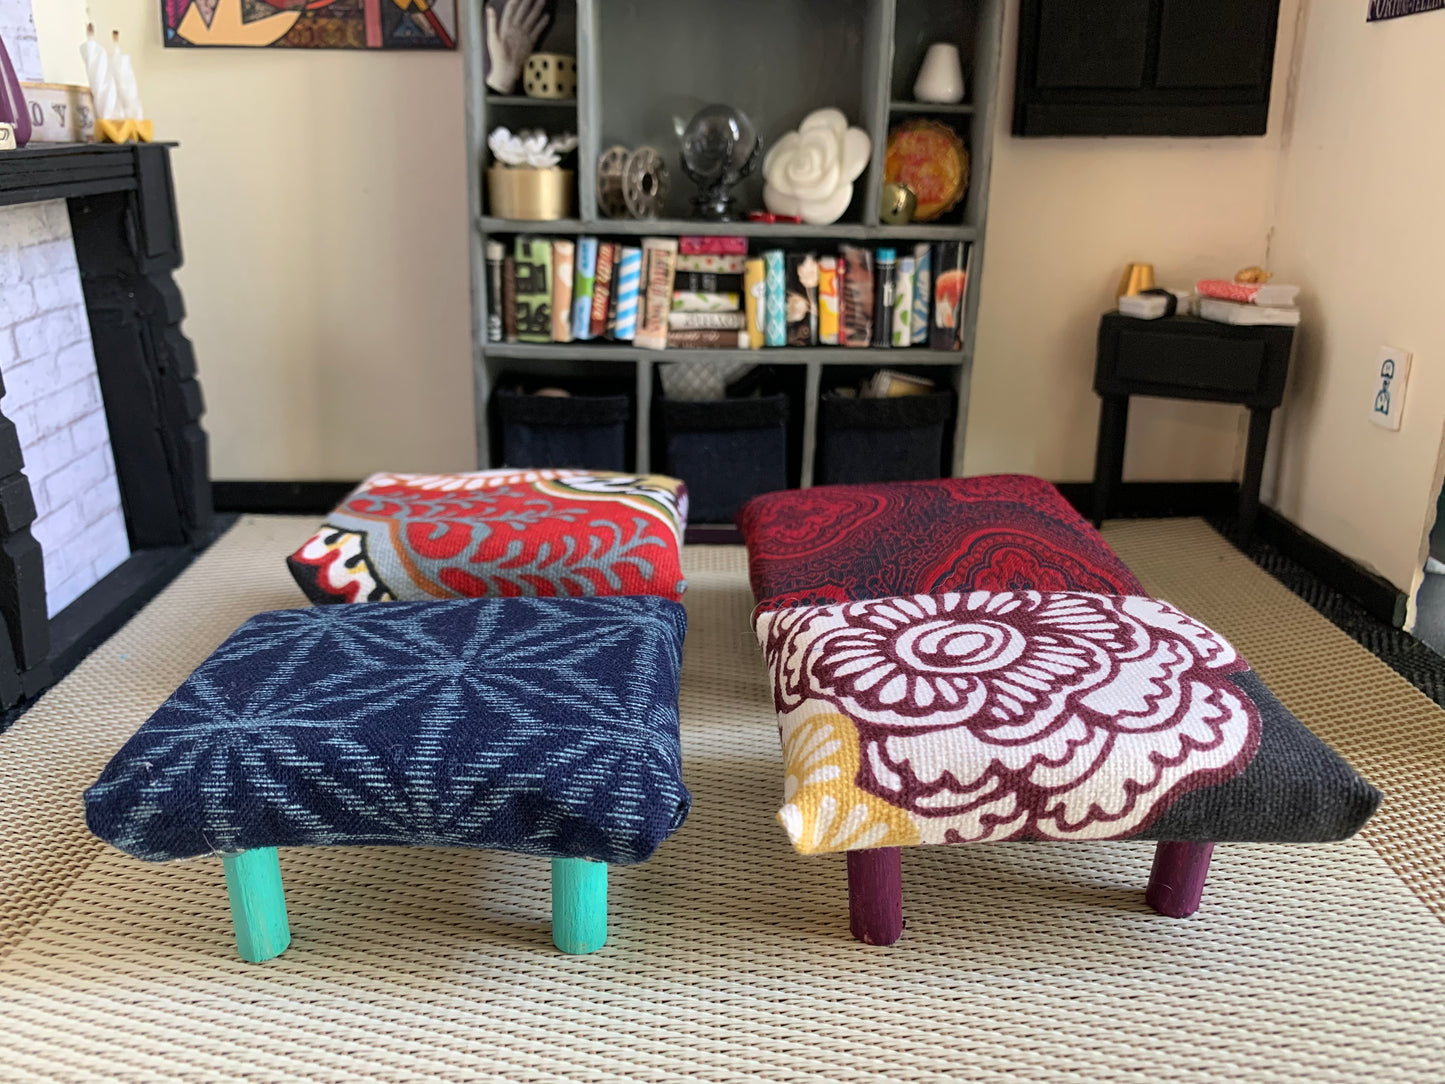 four ottomans, in a dollhouse room for scale and styling